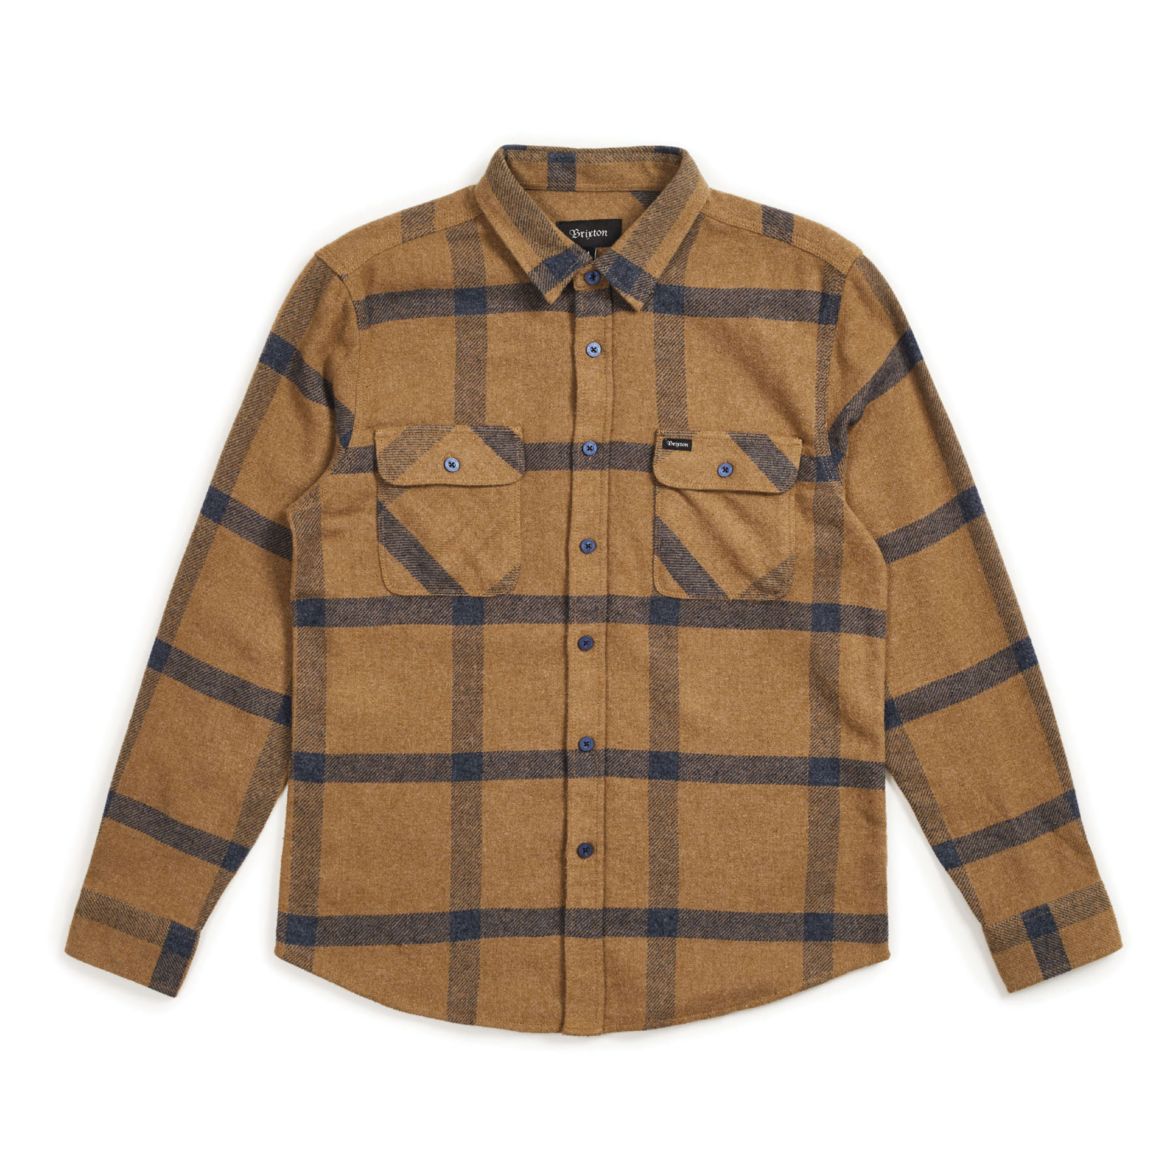 BOWERY L/S FLANNEL - GOLD/NAVY - The Drive Skateshop